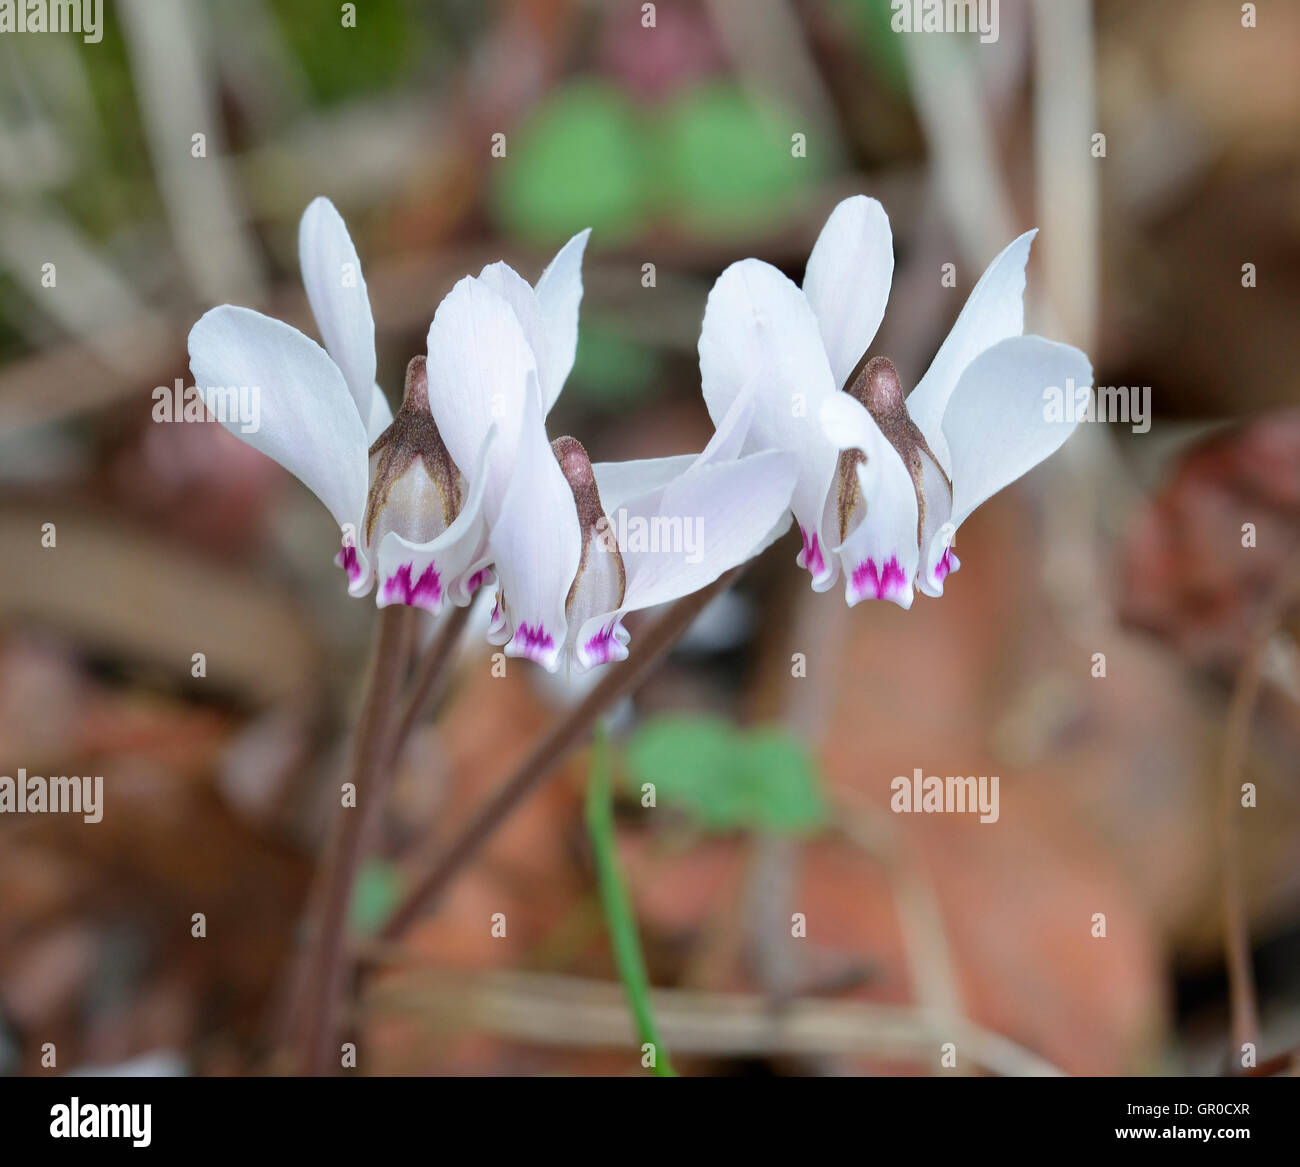 Cypriot Sowbread - Cyclamen cyprium Endemic to Cyprus Stock Photo